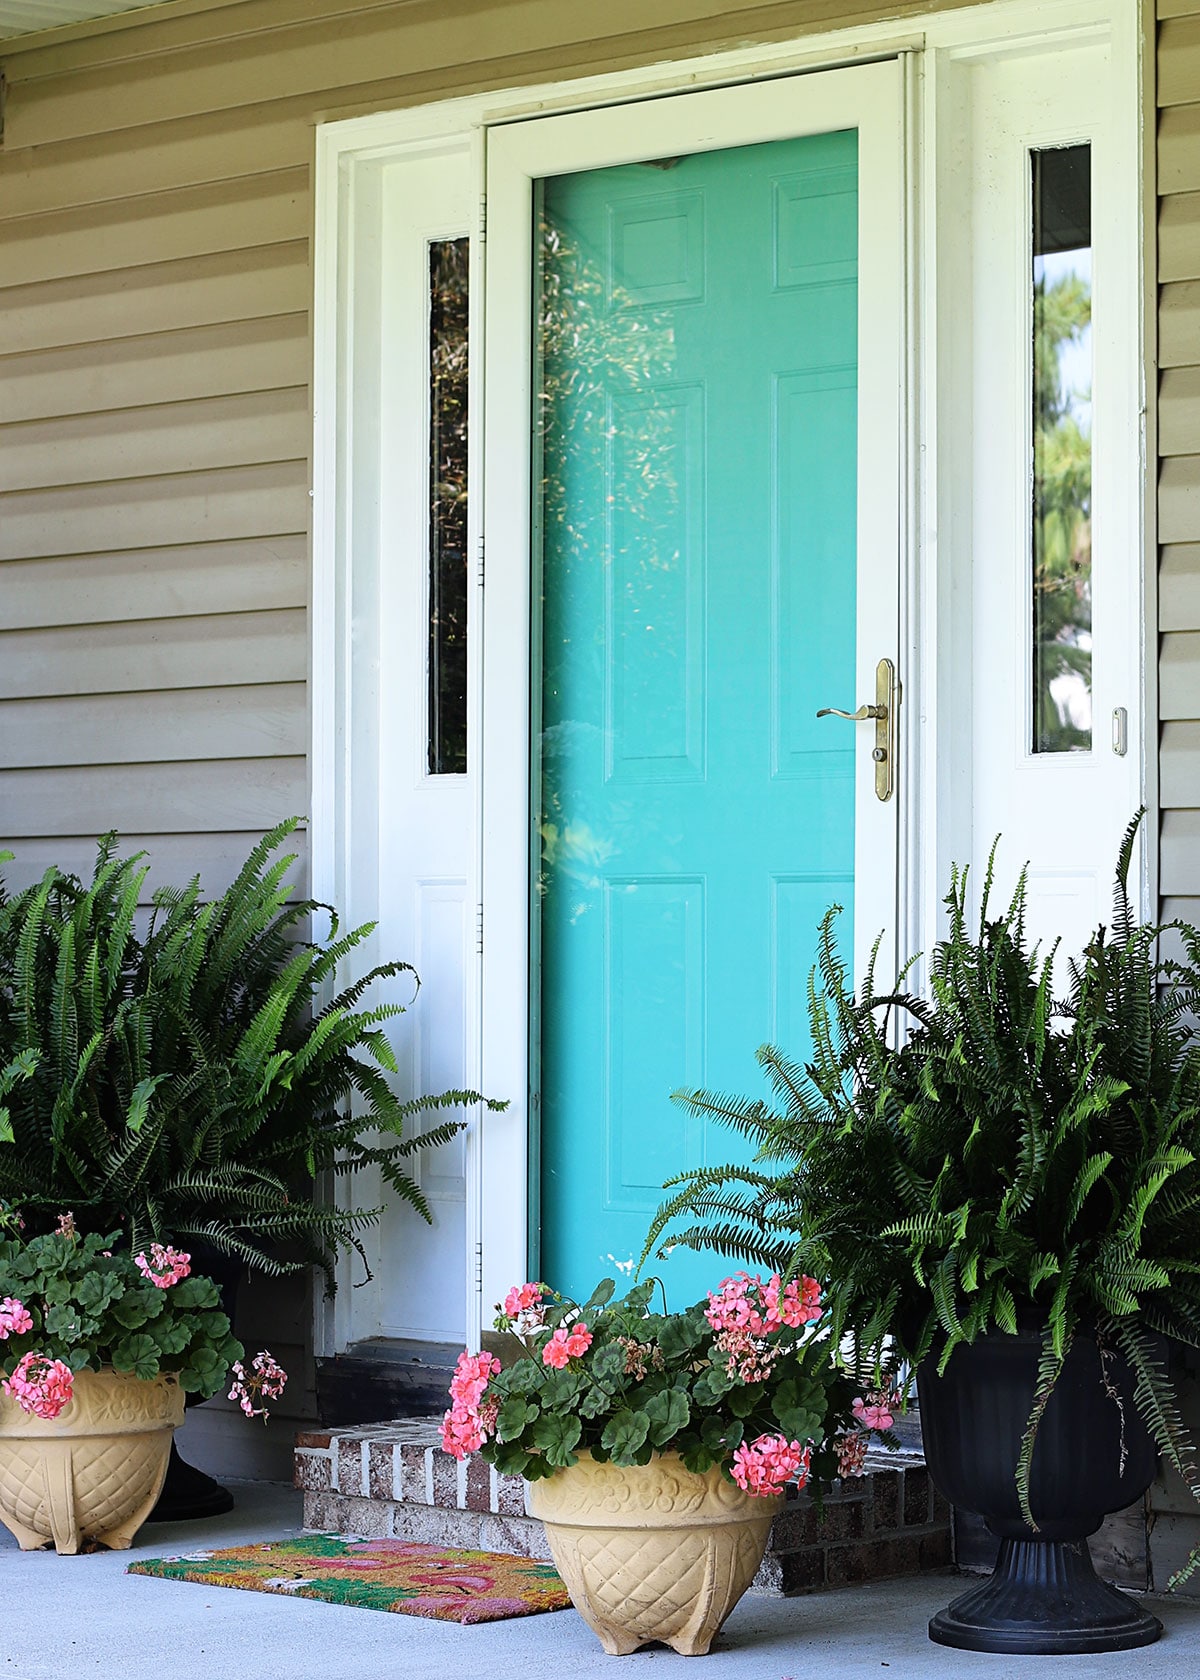 Front door painted turquoise with geraniums and ferns on the porch.